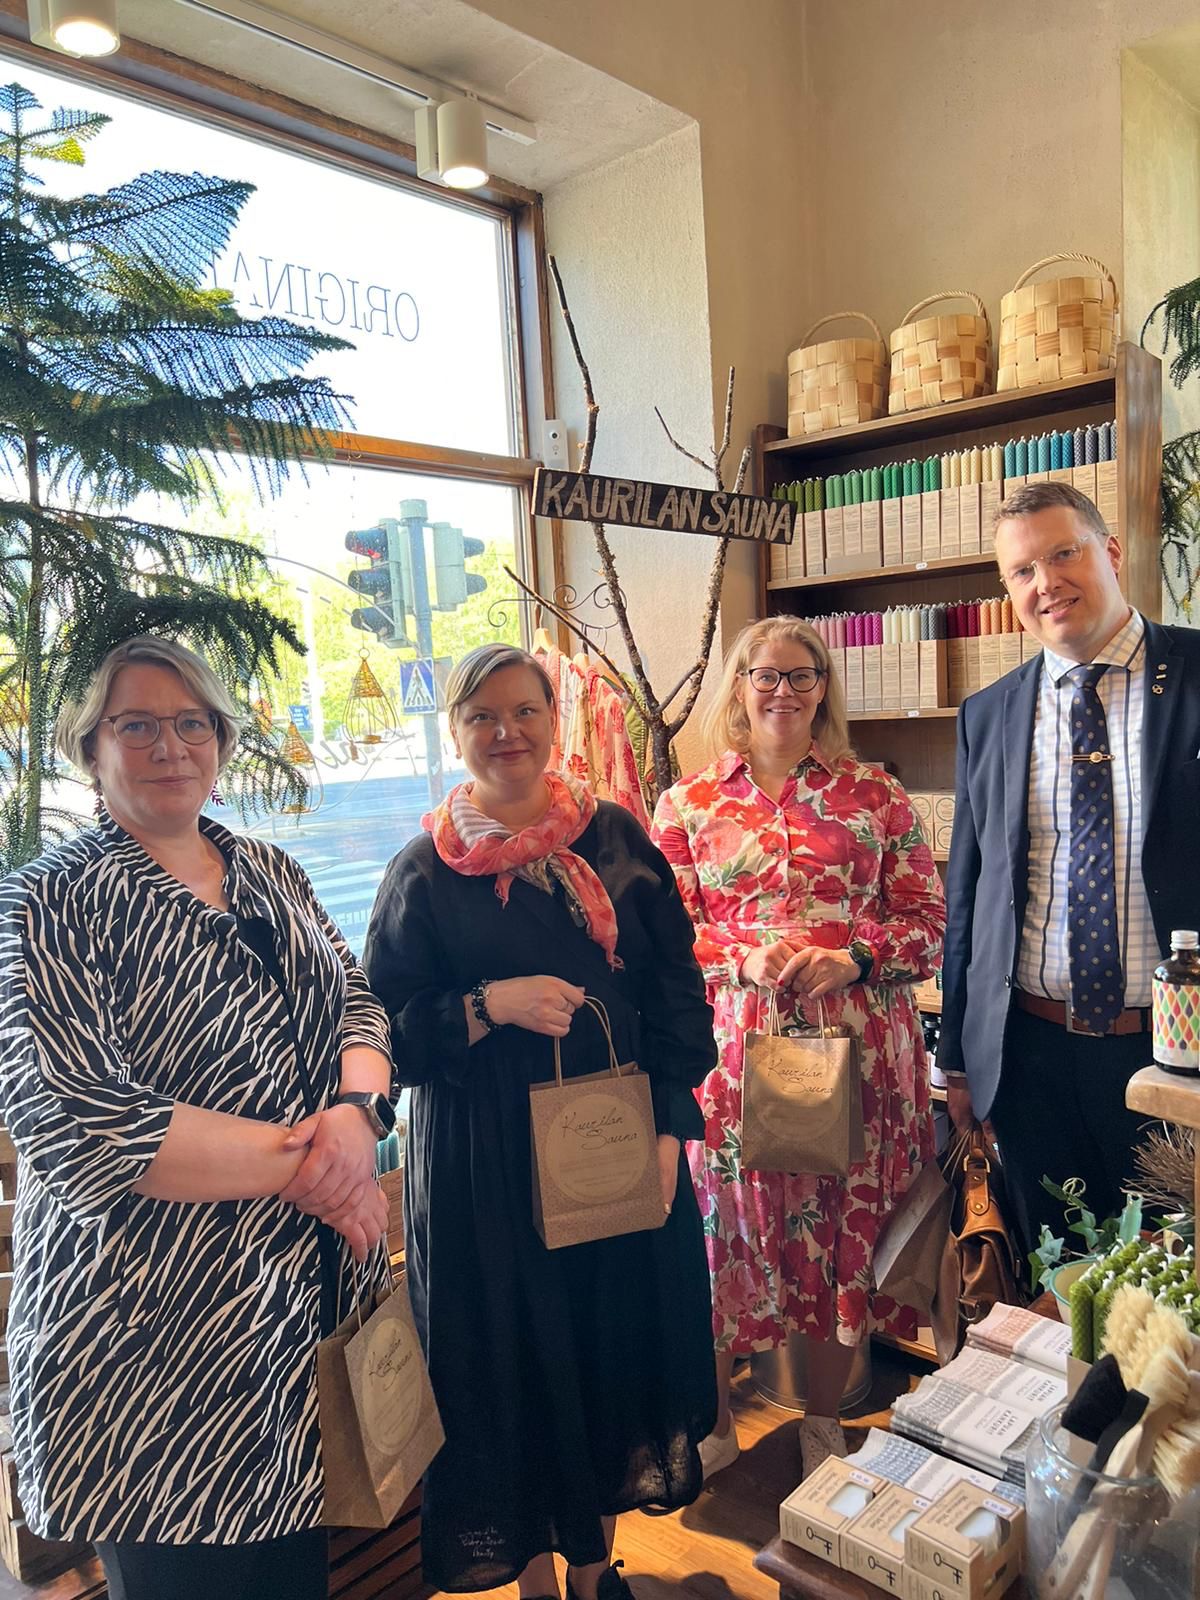 On Friday, we made two company visits: to Innovation Home and Kaurila's sauna. At Innovation Home, we heard the inspiring story of Kovanen's Capital Family Office and the wonderful business story of Eeva Kovanen. At Kaurila Sauna, we made sustainable purchases.